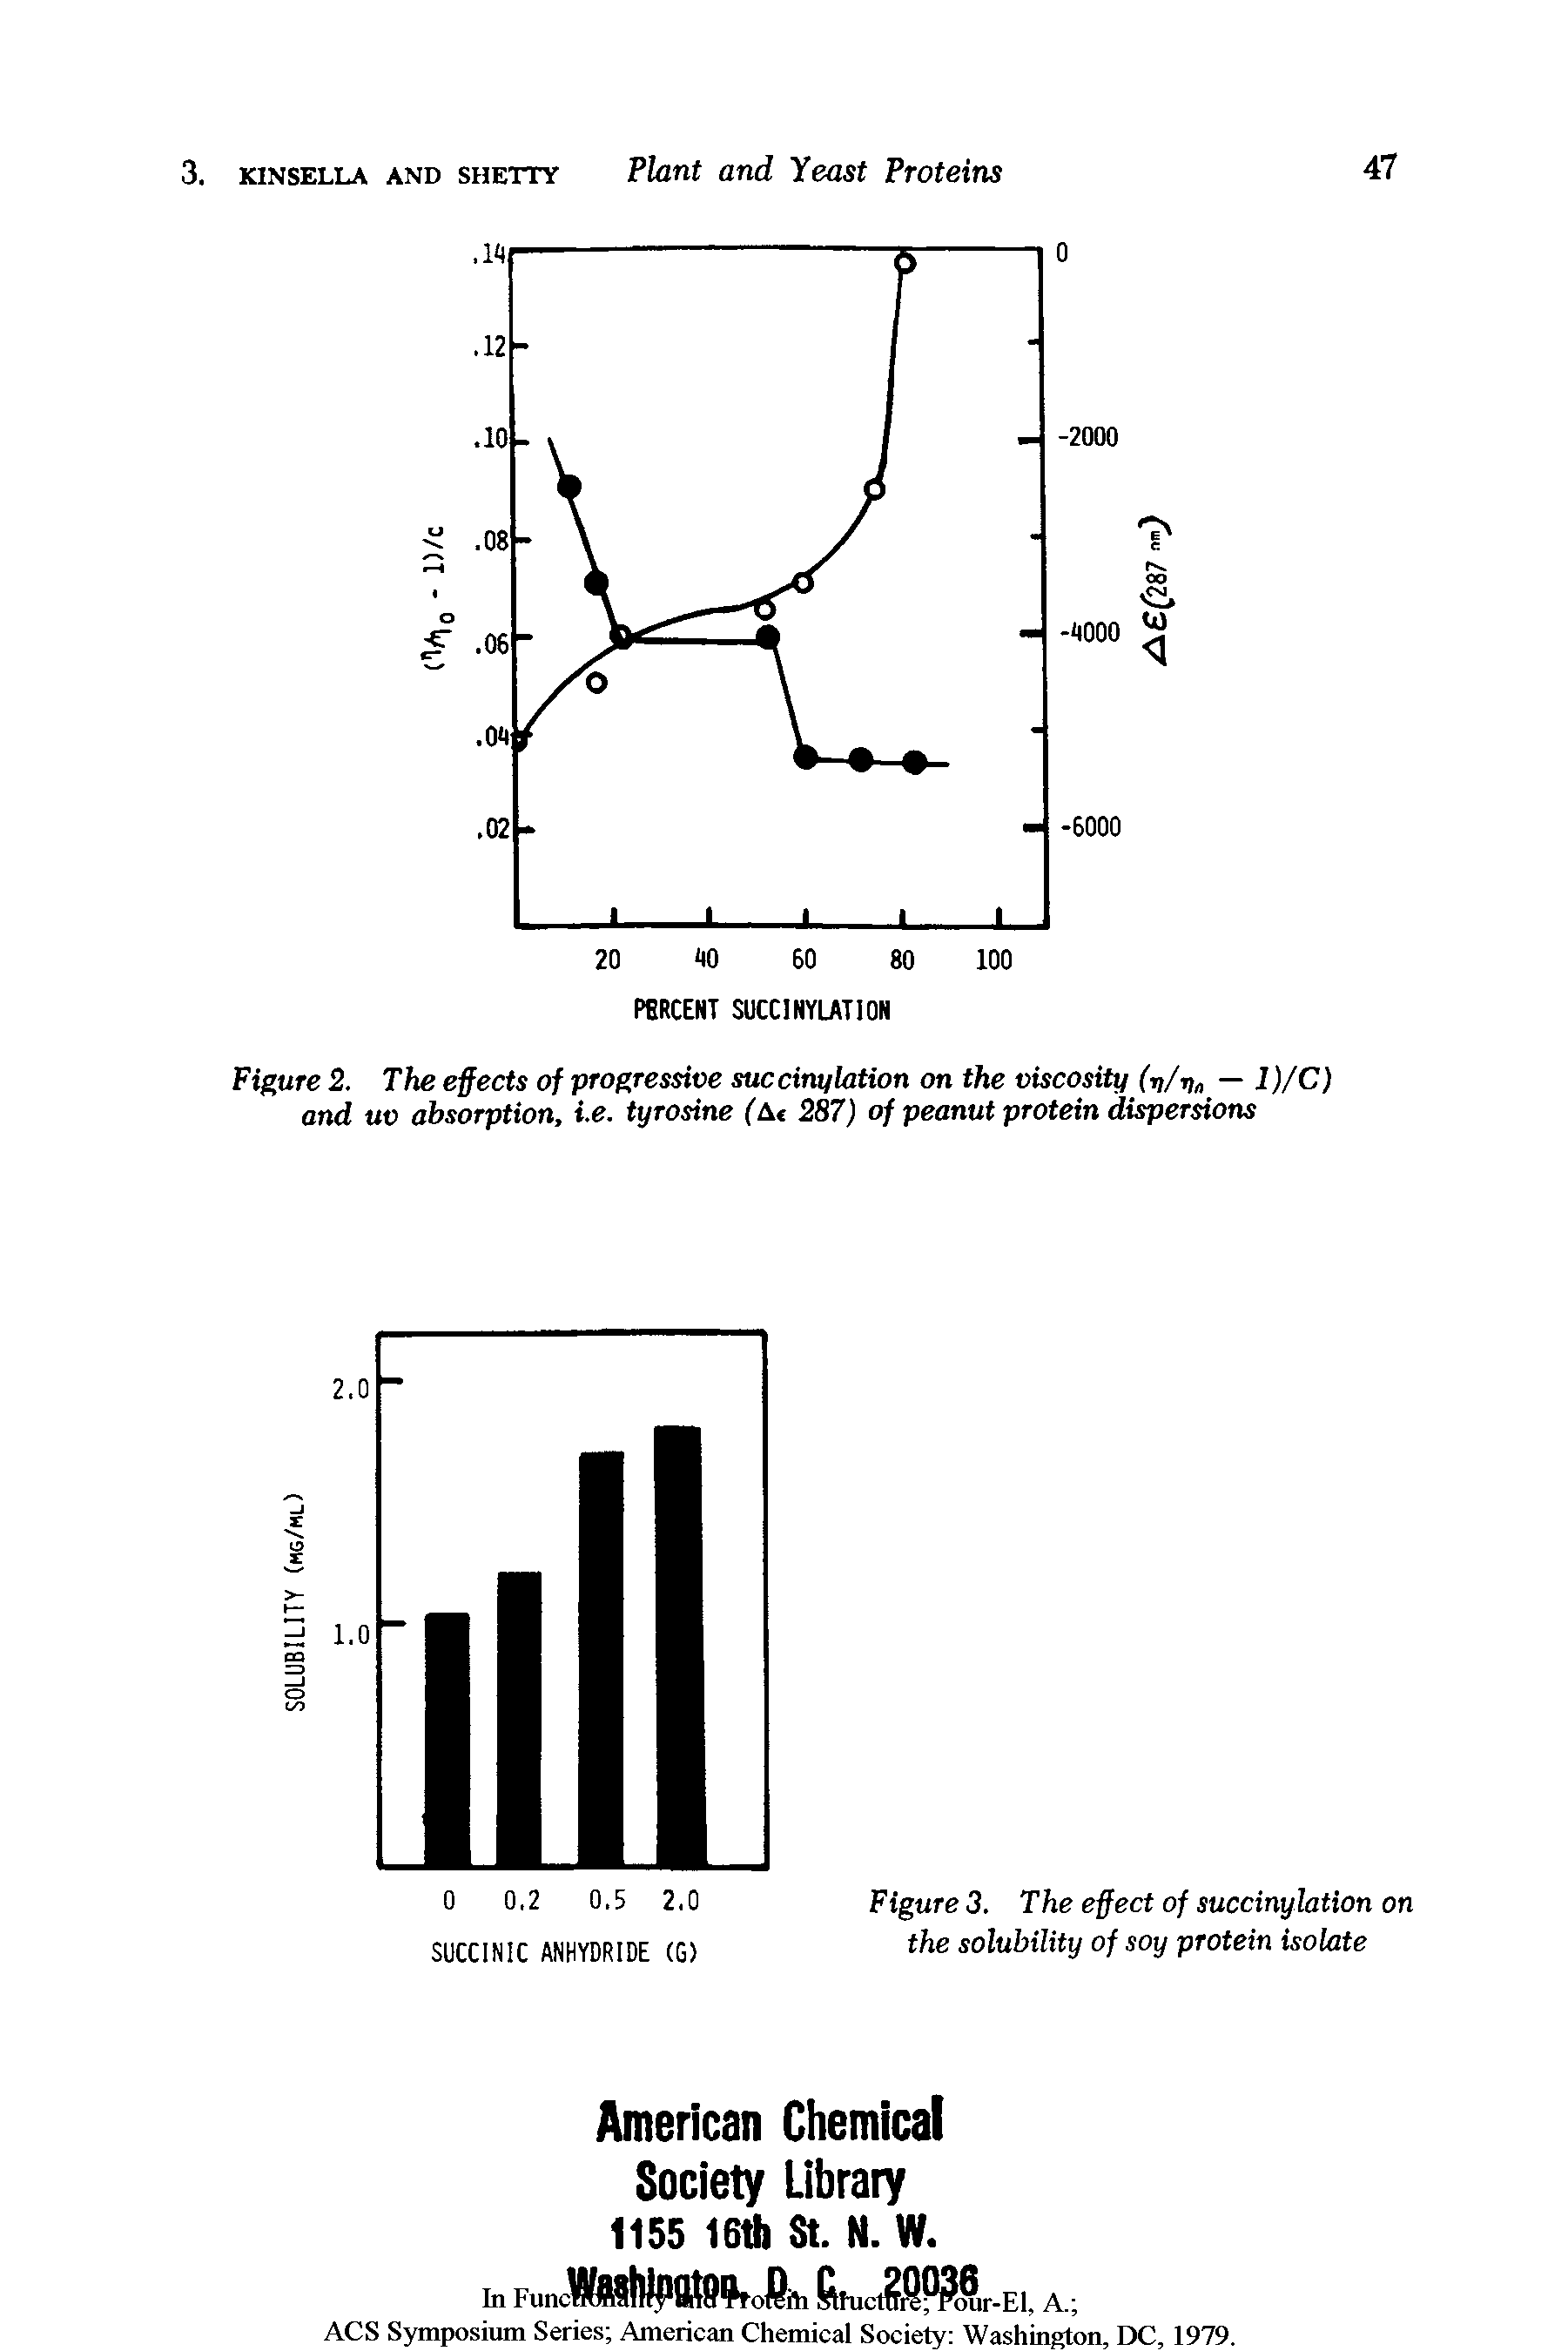 Figure 2. The effects of progressive succinylation on the viscosity (v/v — 1 )/C) and uv absorption, i.e. tyrosine (At 287) of peanut protein dispersions...